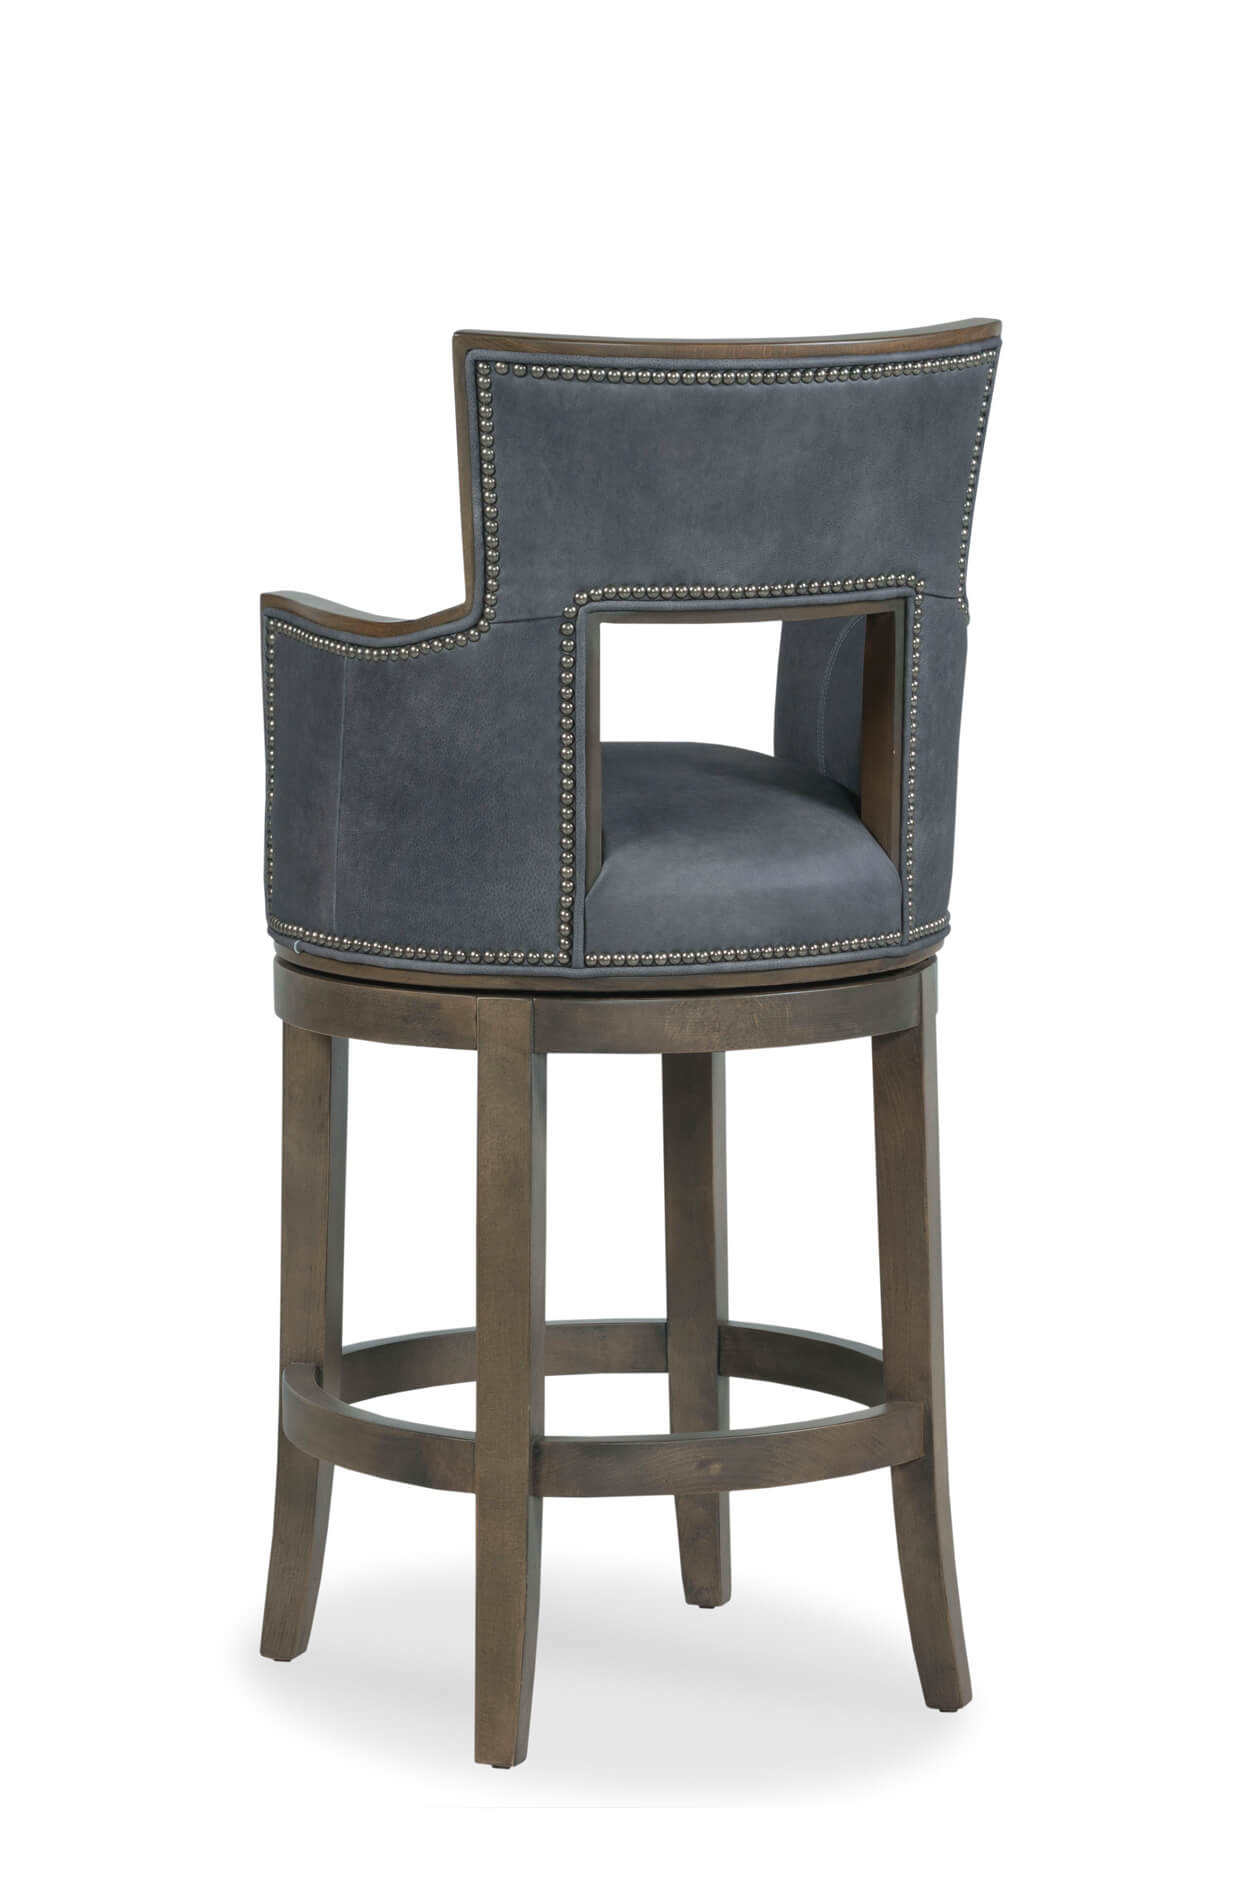 Sidecar Upholstered Wooden Swivel Stool, Upholstered Swivel Counter Stools With Backs And Arms